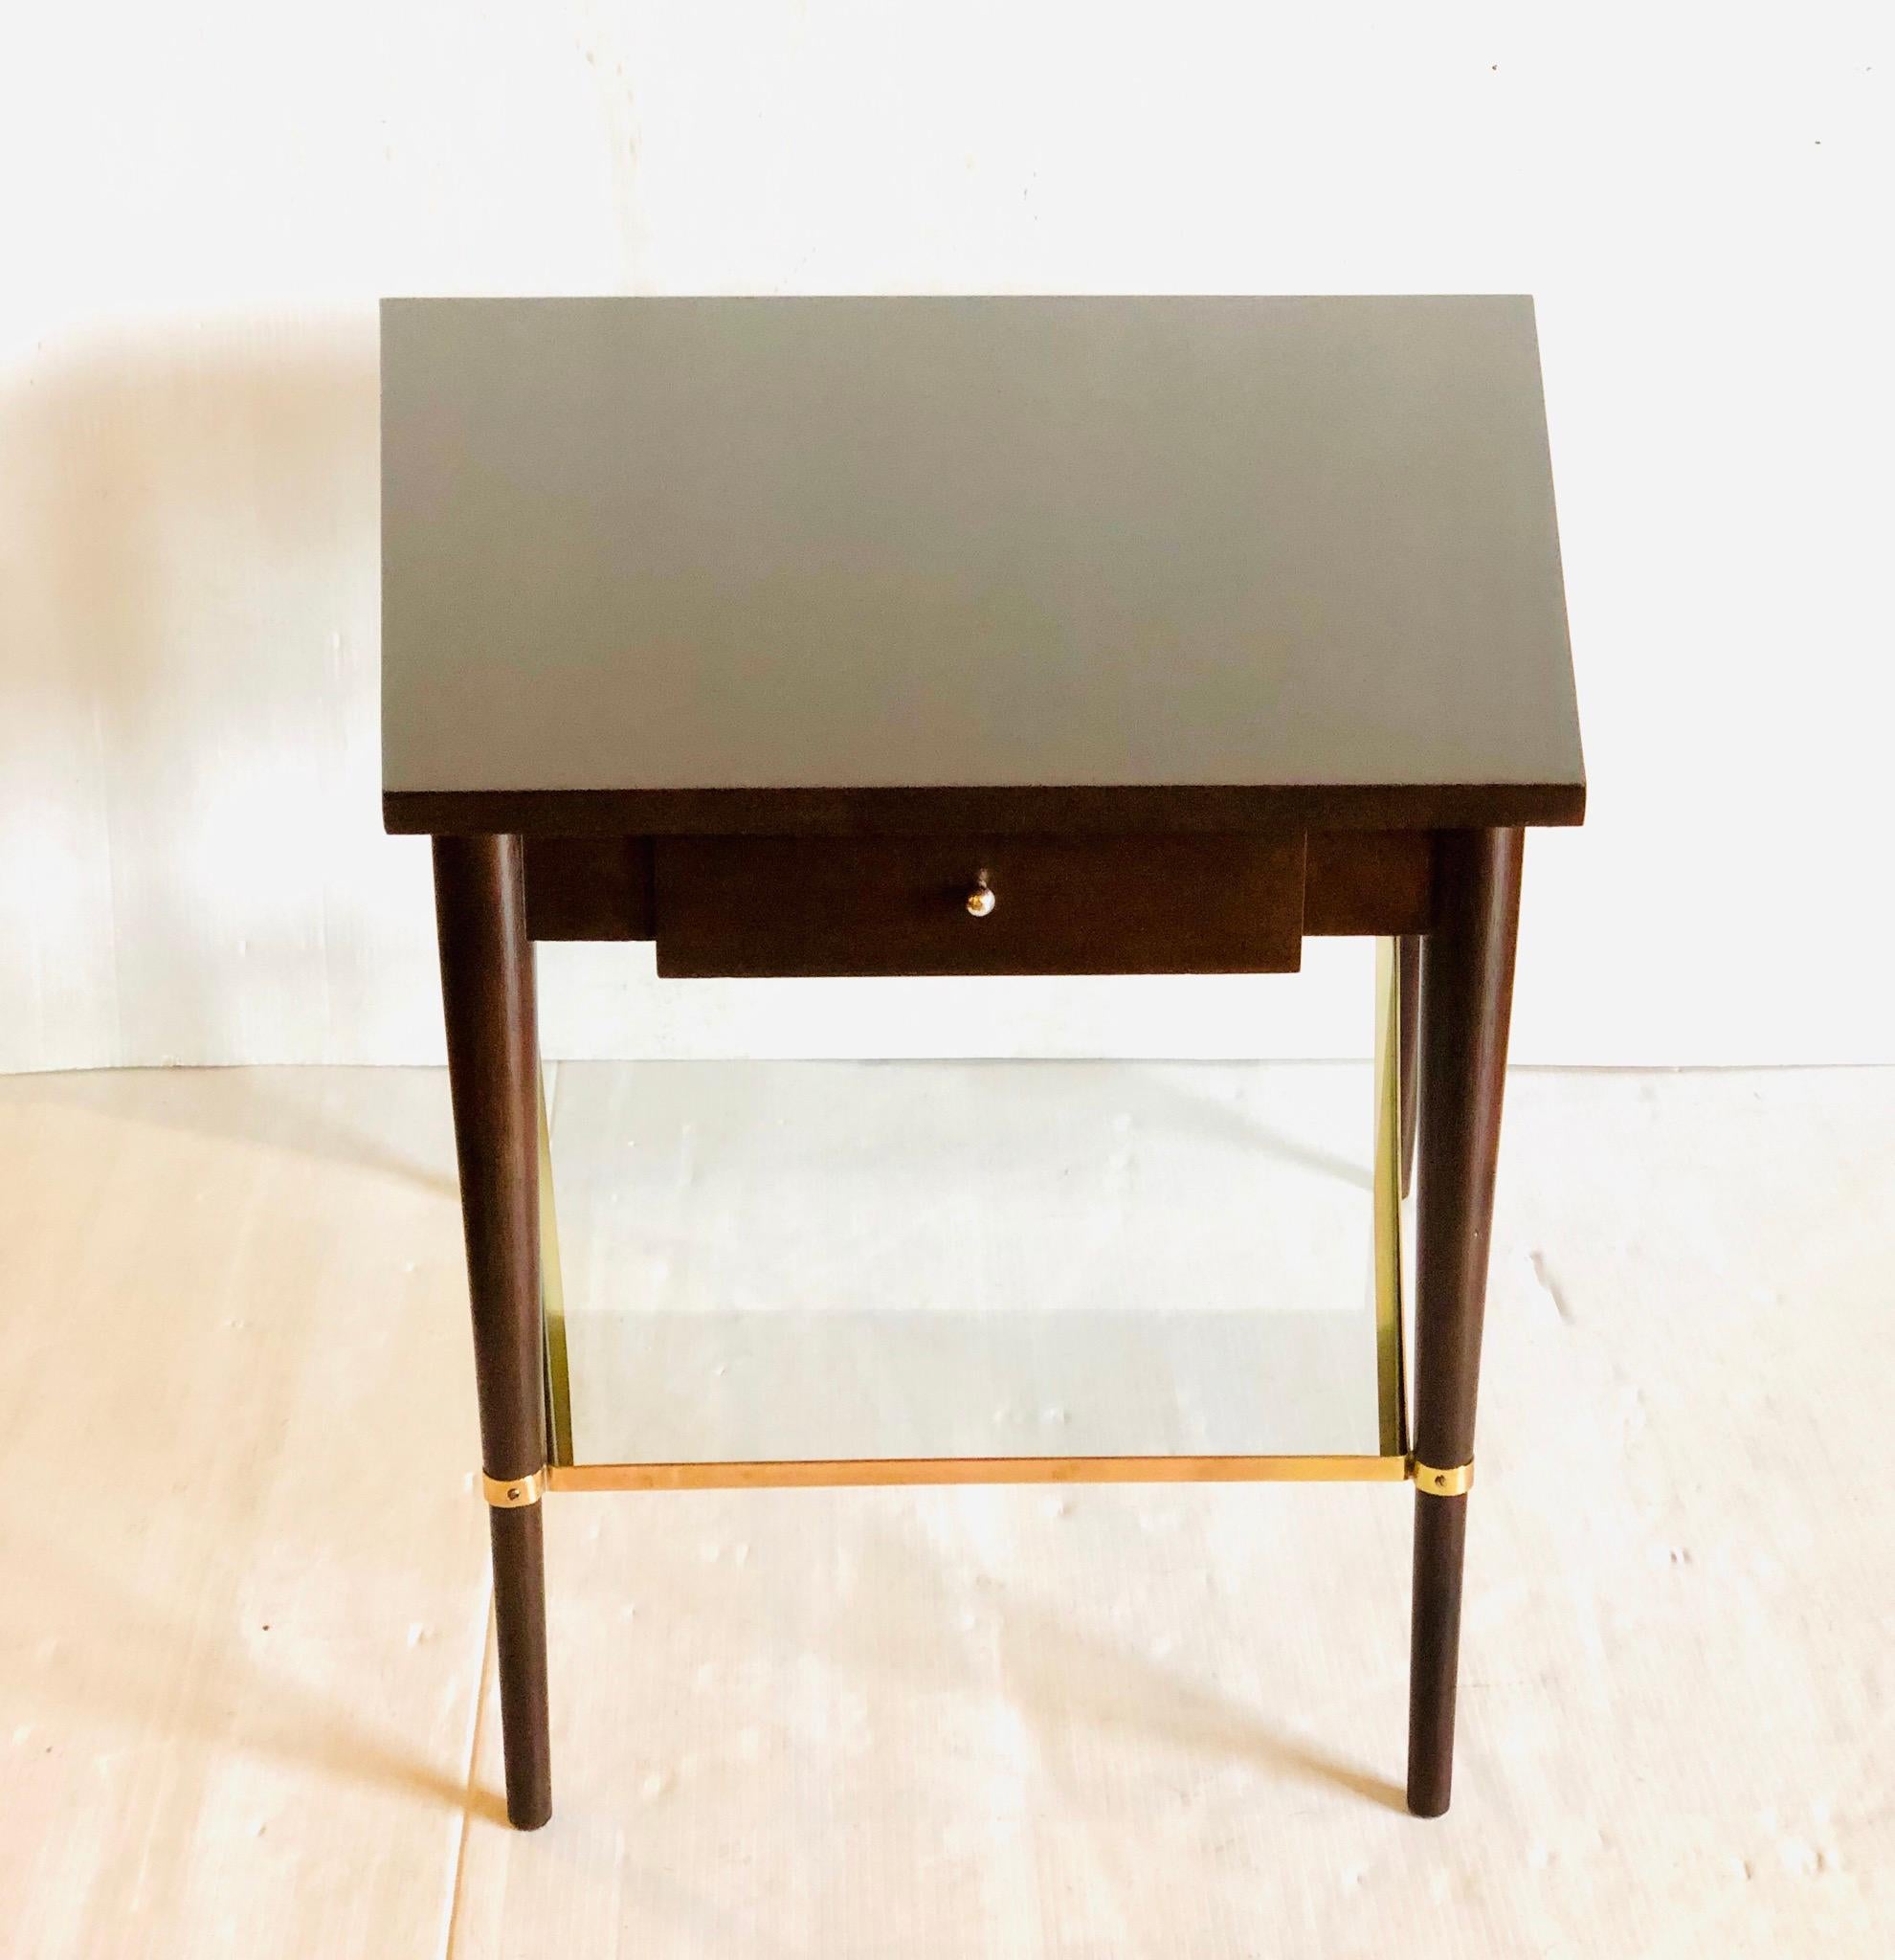 A very rare table designed by Paul McCobb for Directional designs, circa 1950s, mahogany stained in walnut finish, with brass fittings trapezoidal shape 26